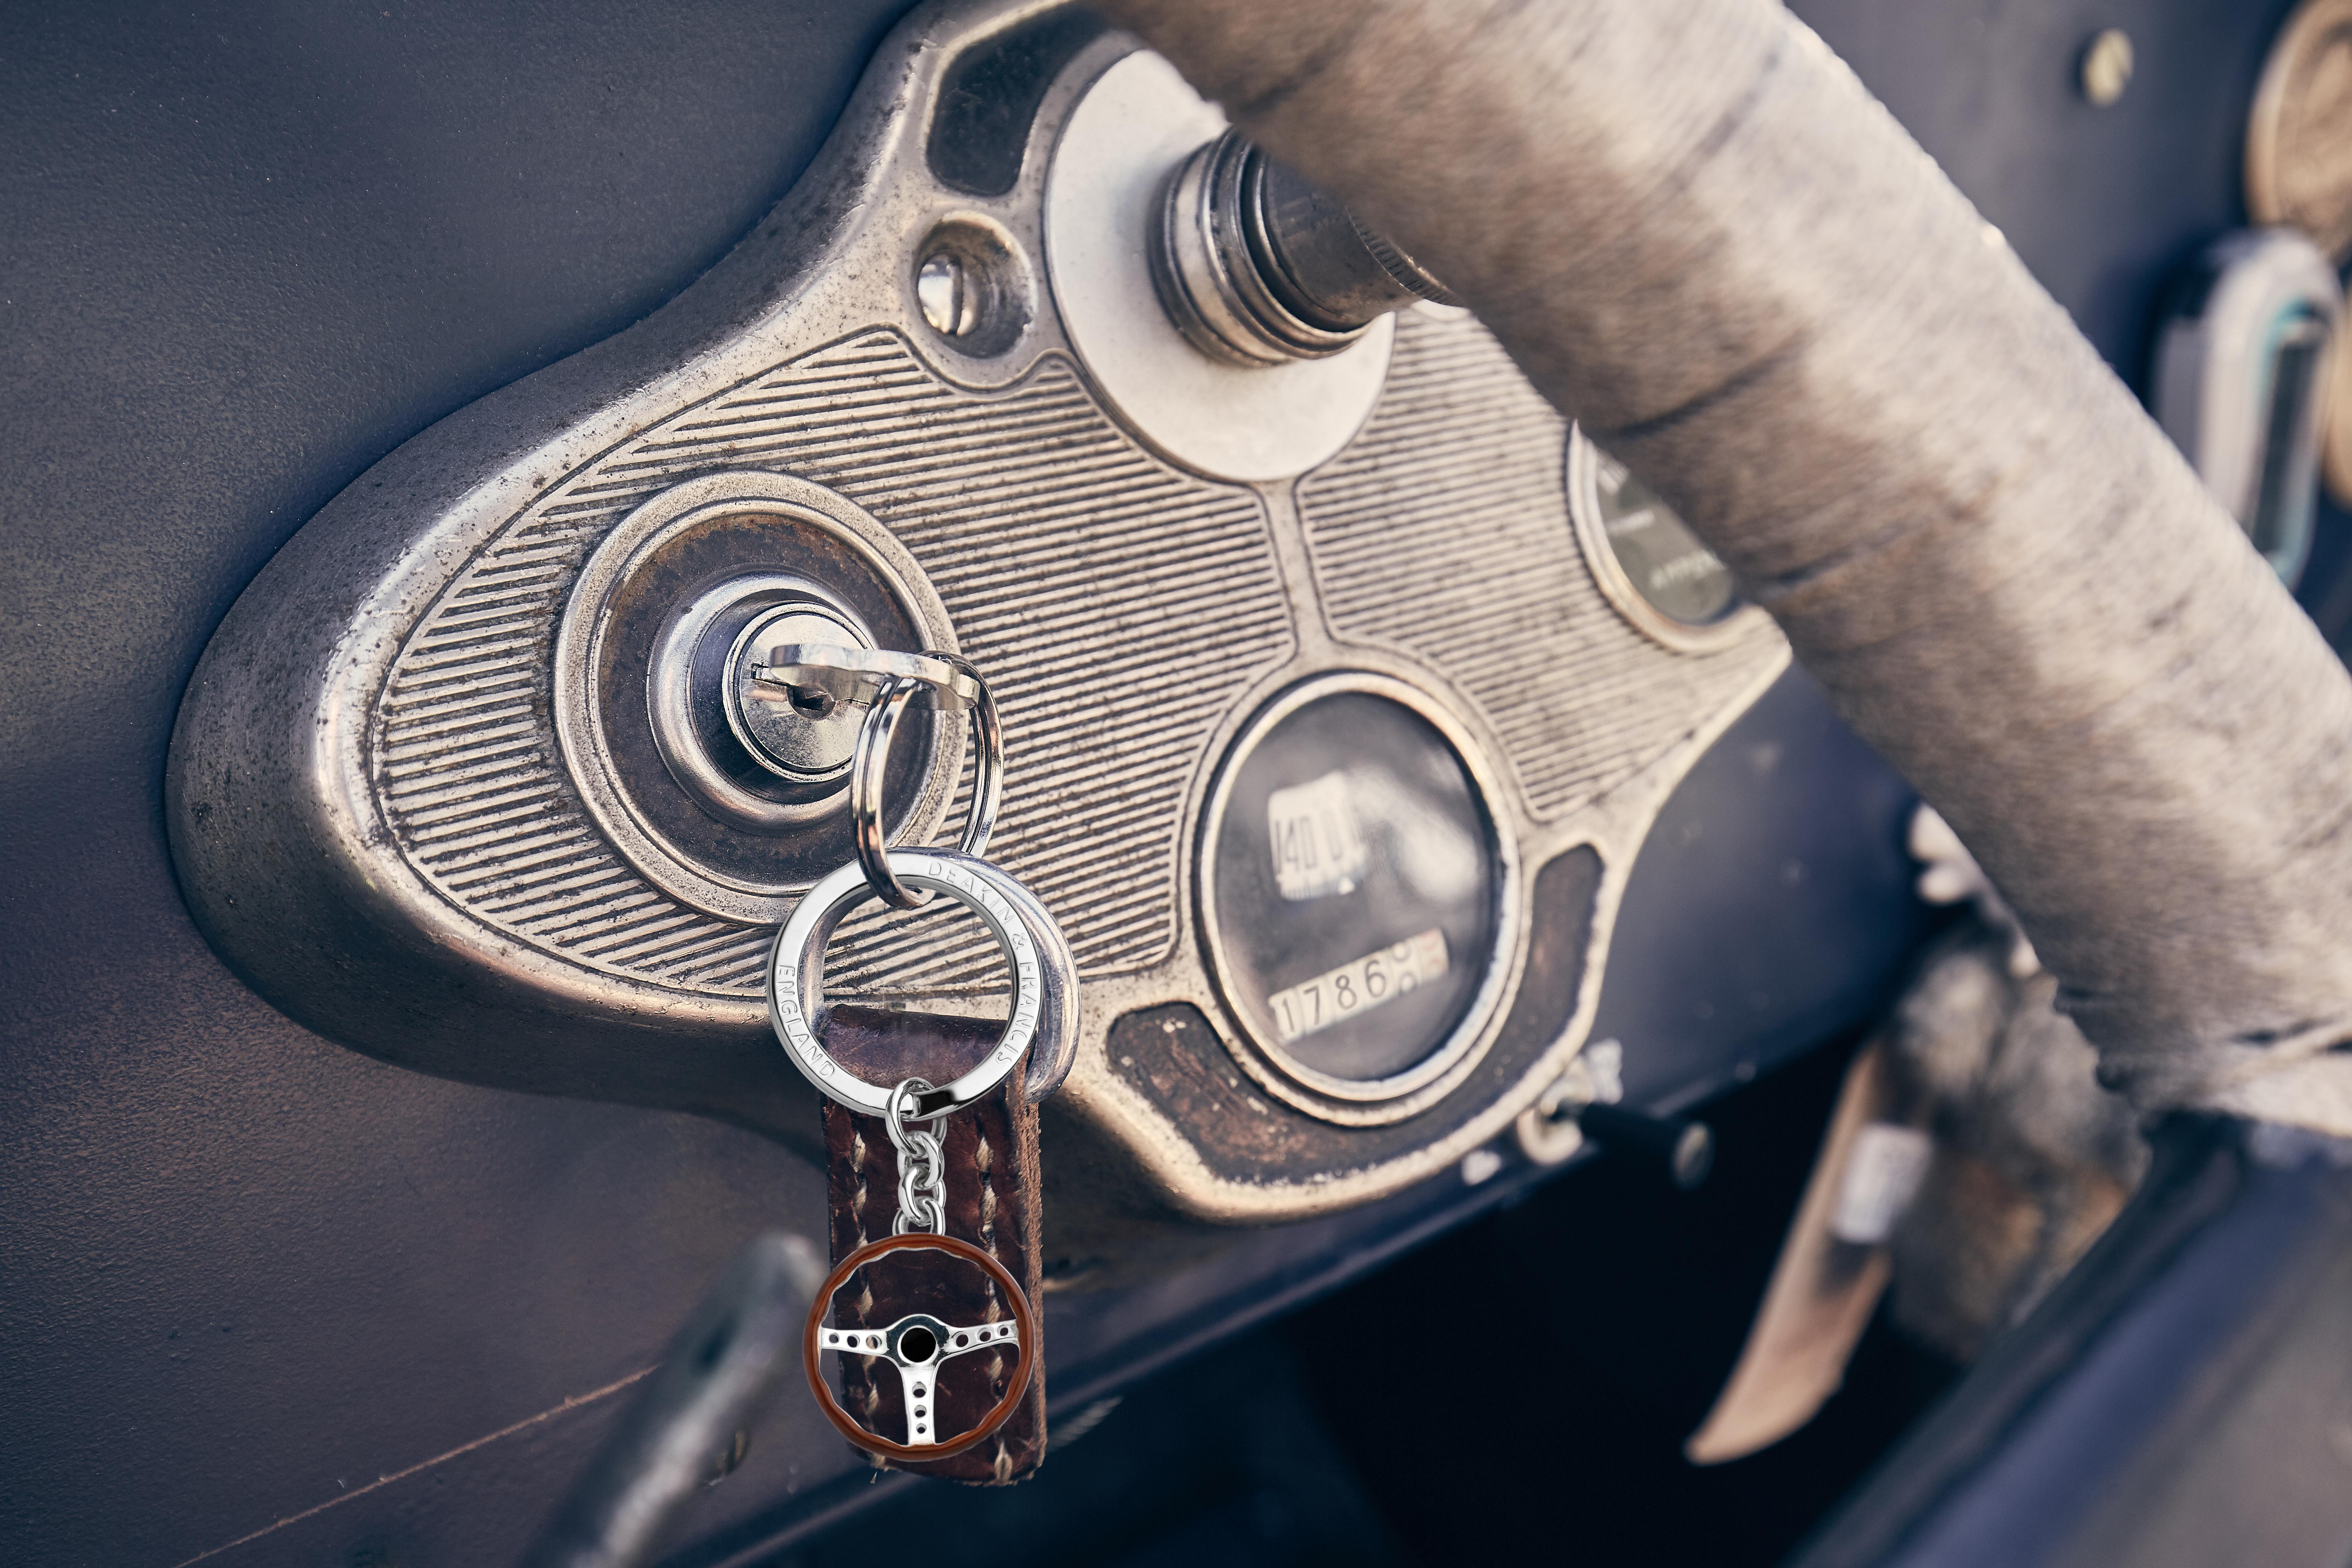 DEAKIN & FRANCIS, Piccadilly Arcade, London

Keep your keys safe in style. With fond memories of the vintage style cars, this best selling sterling silver vintage steering wheel keyring has a brown hand-enamel finish. Why not get the matching